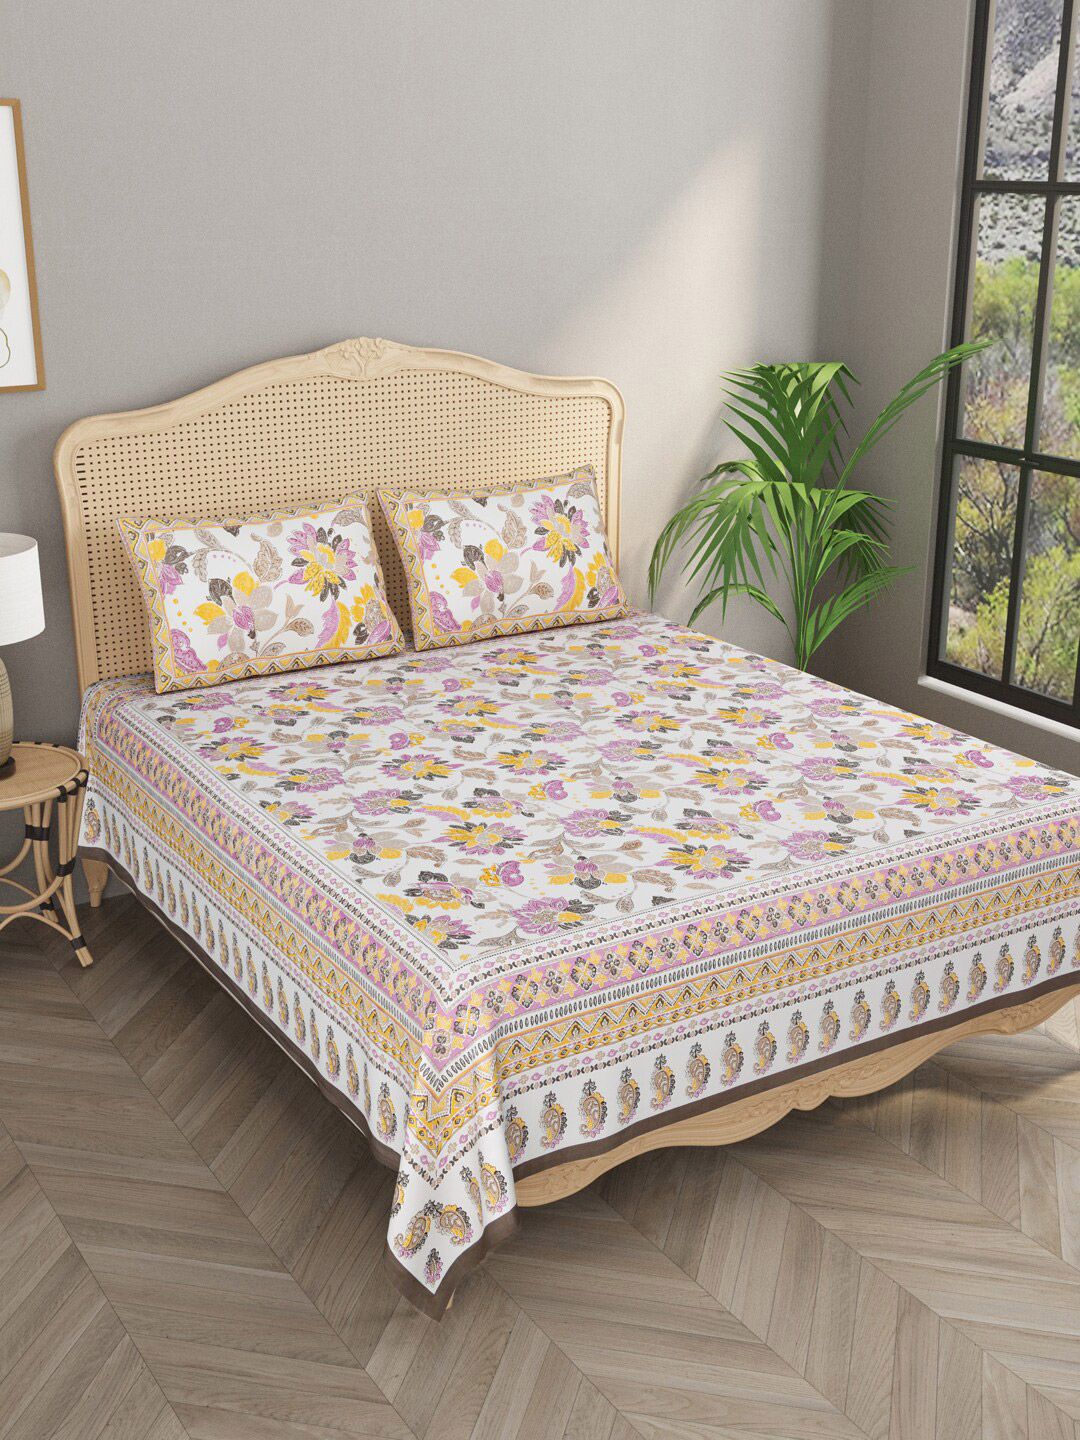 Gulaab Jaipur Purple & White Floral 600 TC King Bedsheet with 2 Pillow Covers Price in India